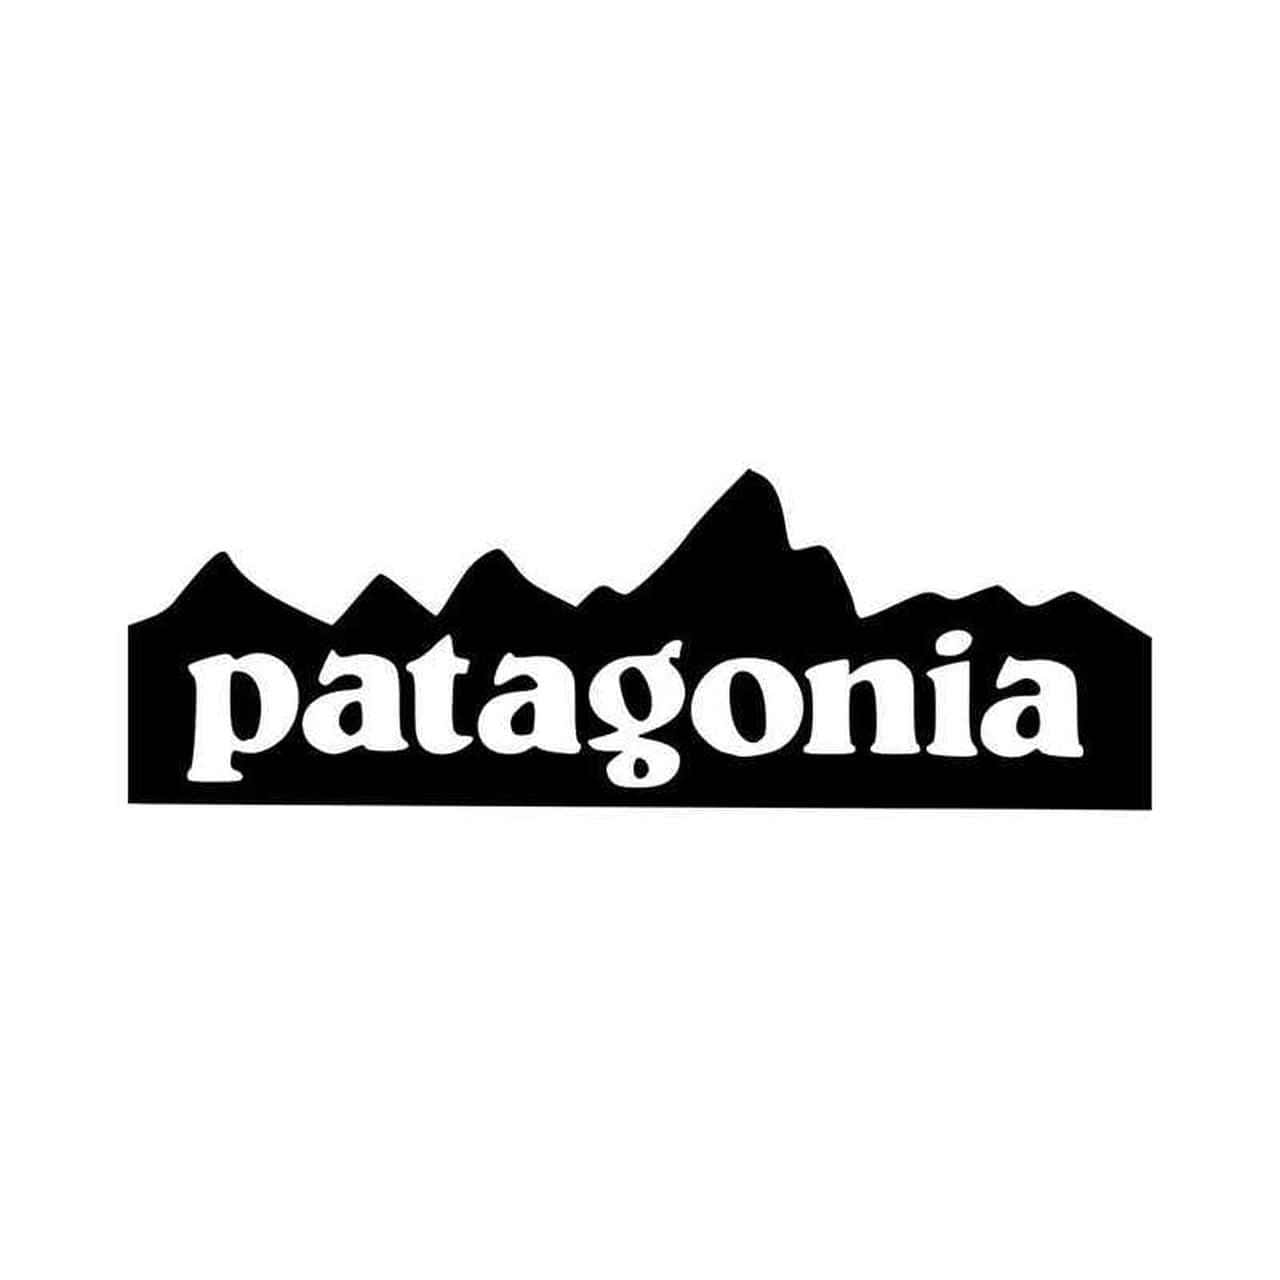 Unplug from life’s distractions and enjoy the beauty of Patagonia